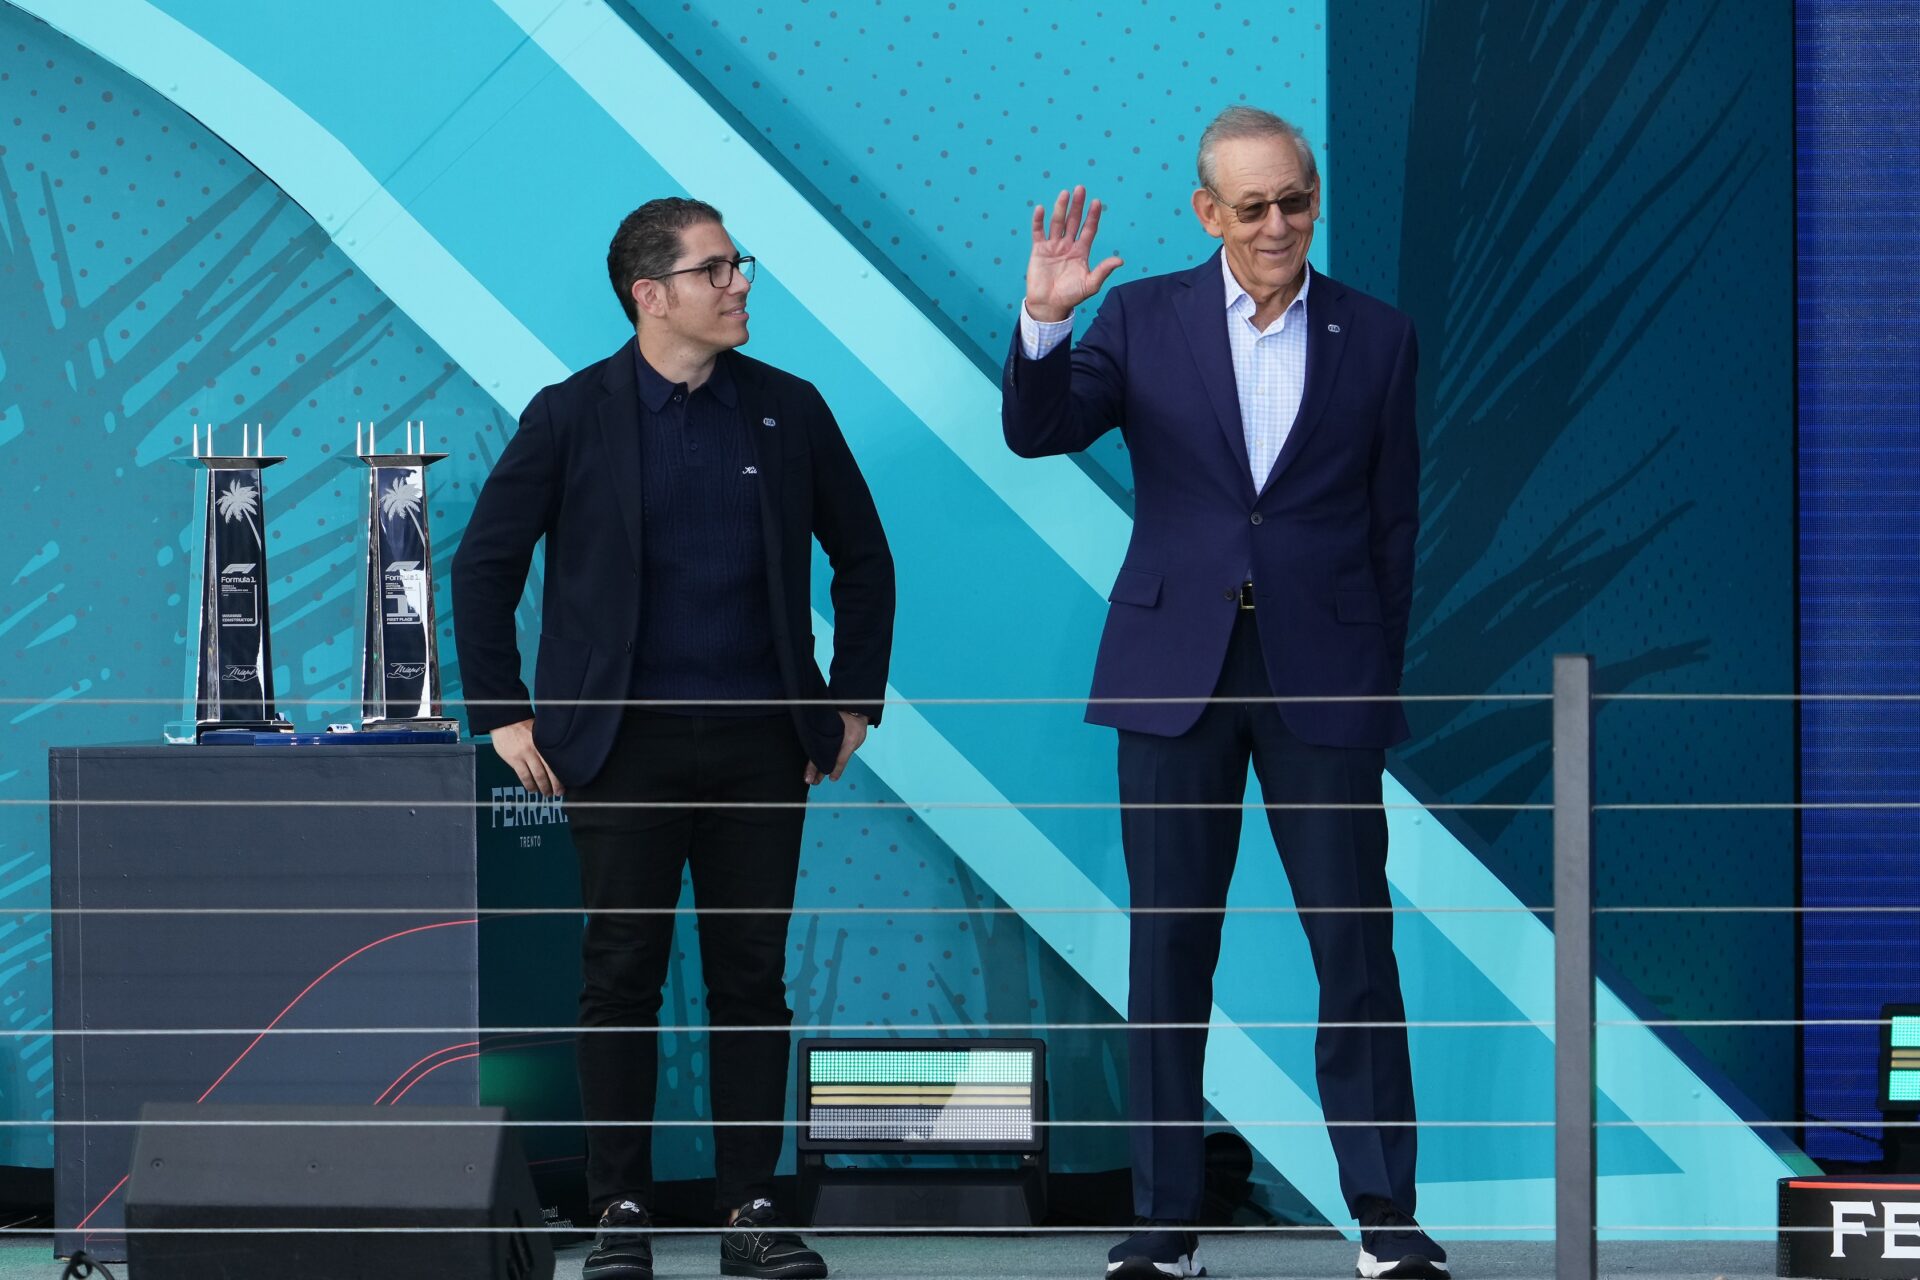 Miami Dolphins owner Stephen Ross waves from the podium of the Miami Grand Prix.